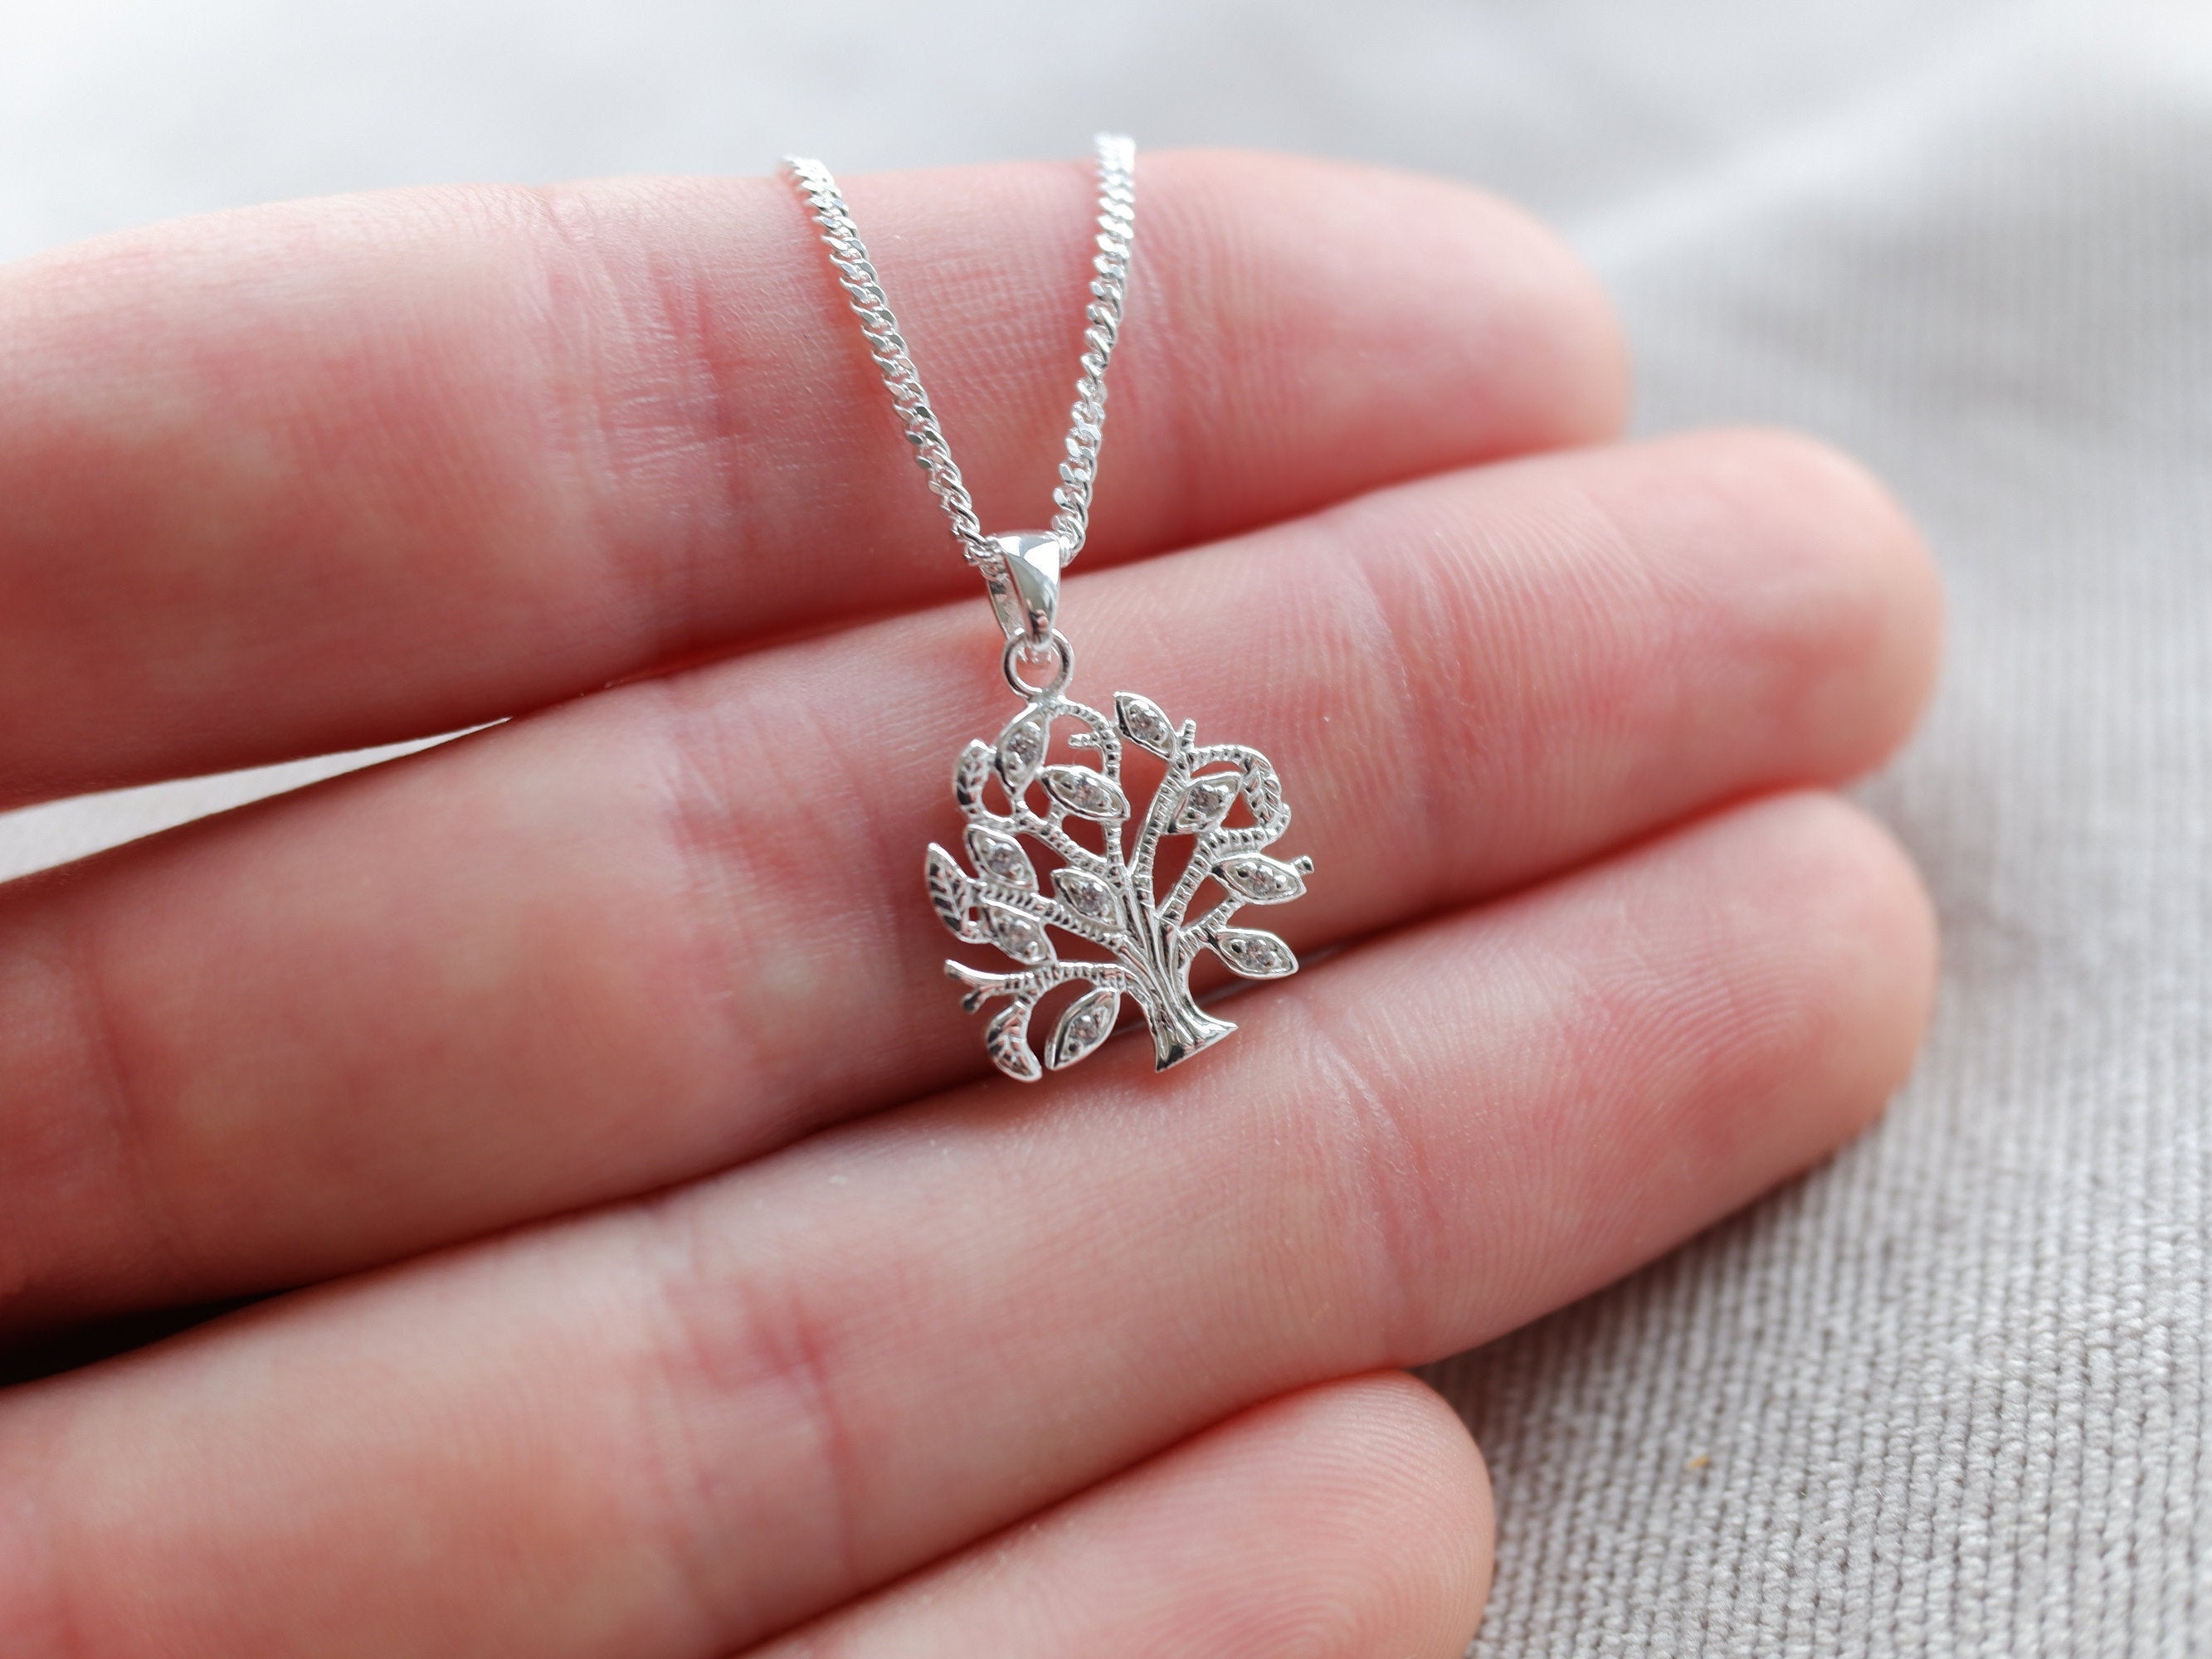 Sterling Silver Tree Of Life Jewelled Pendant Necklace - Diamond Cut Sterling Silver Chain - Boho Jewellery